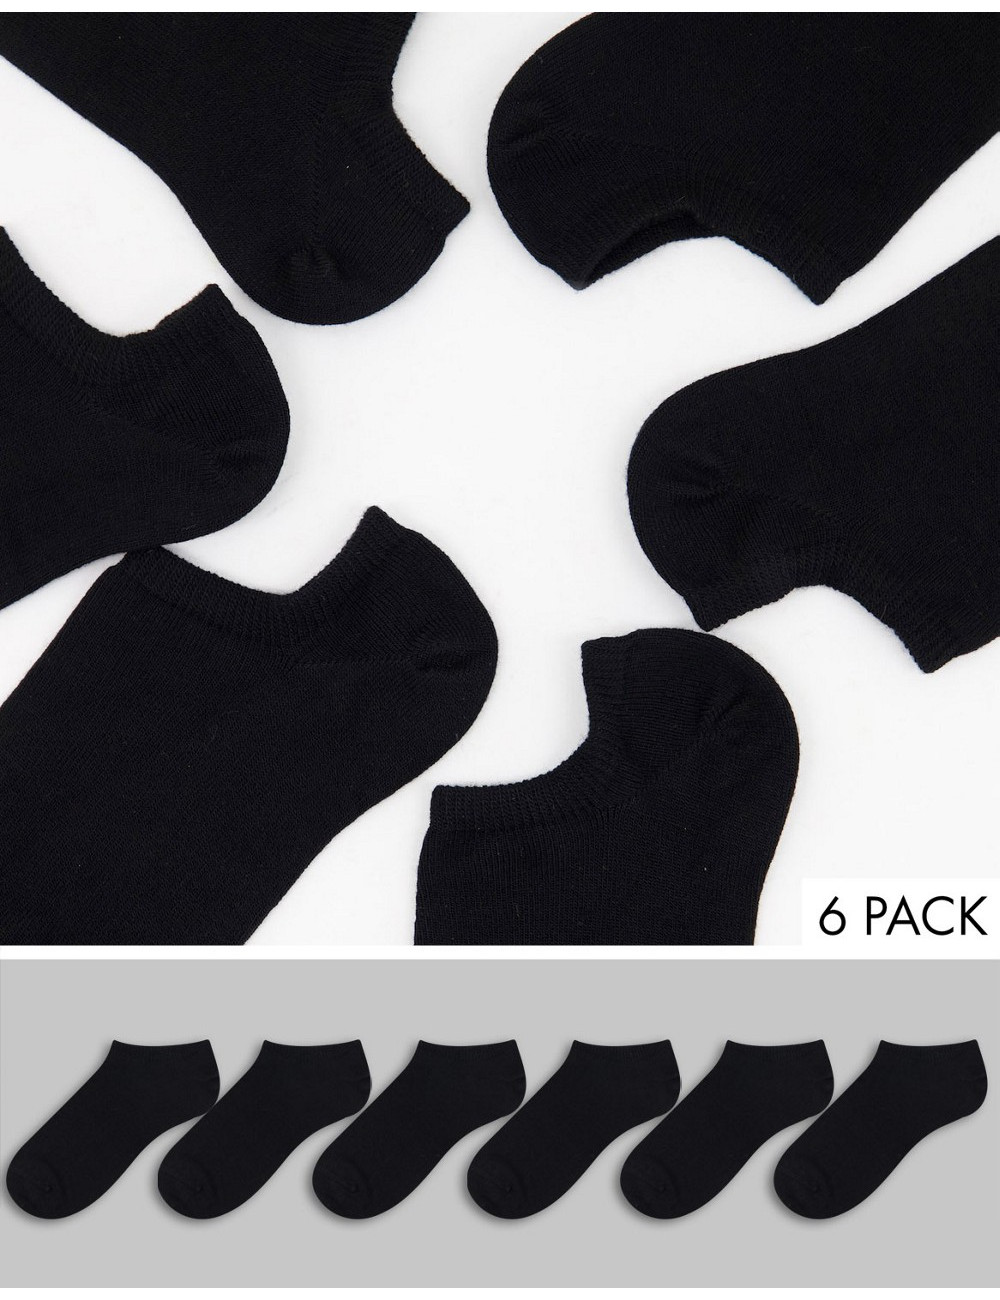 Accessorize pack of 6...